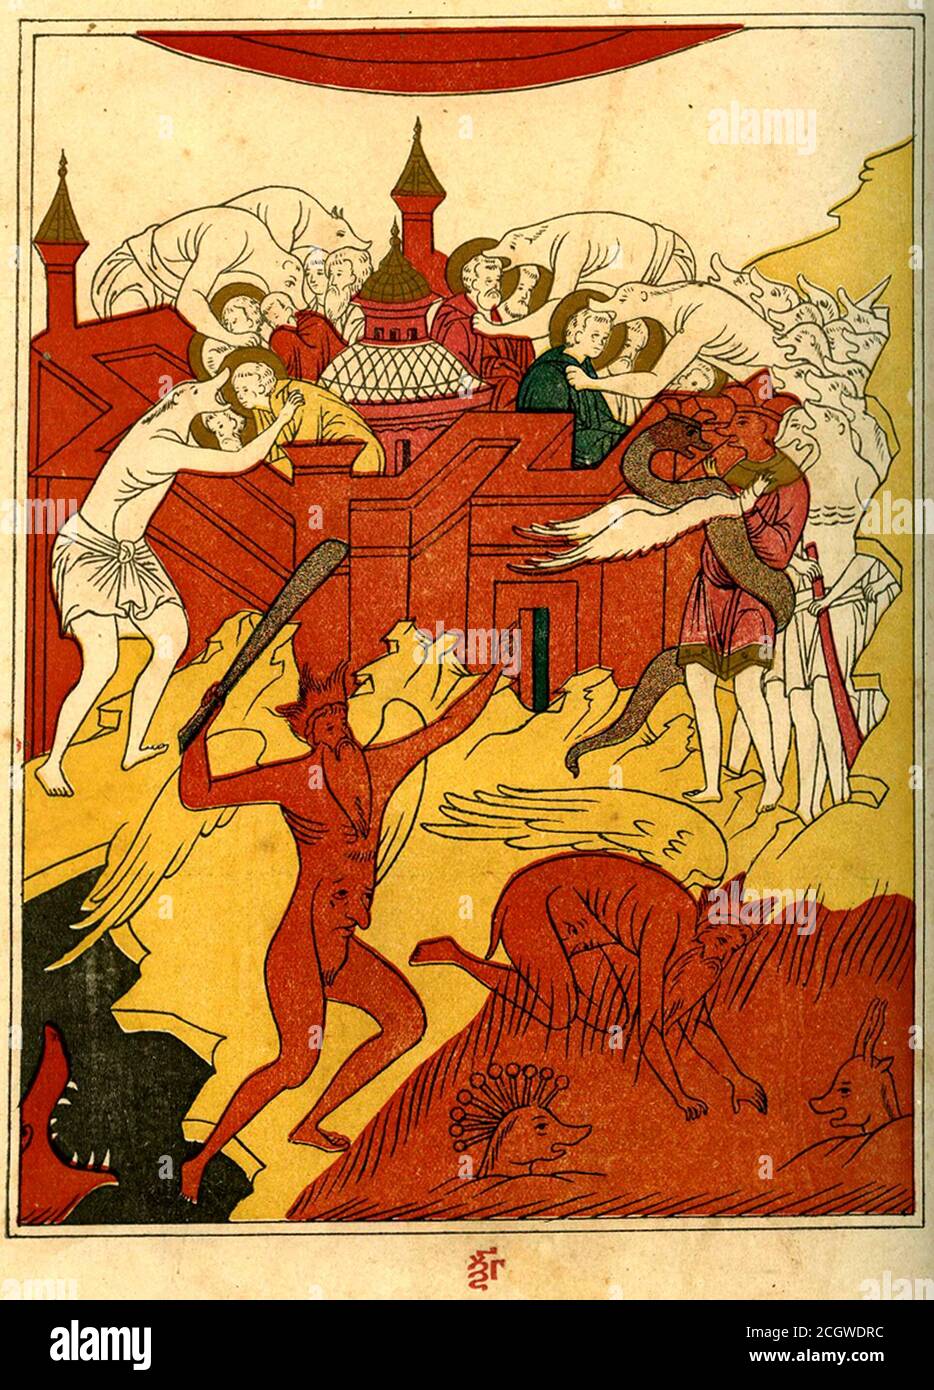 Devil, Gog and Magog attack the Holy City. (from a 17th century Russian manuscript) Stock Photo